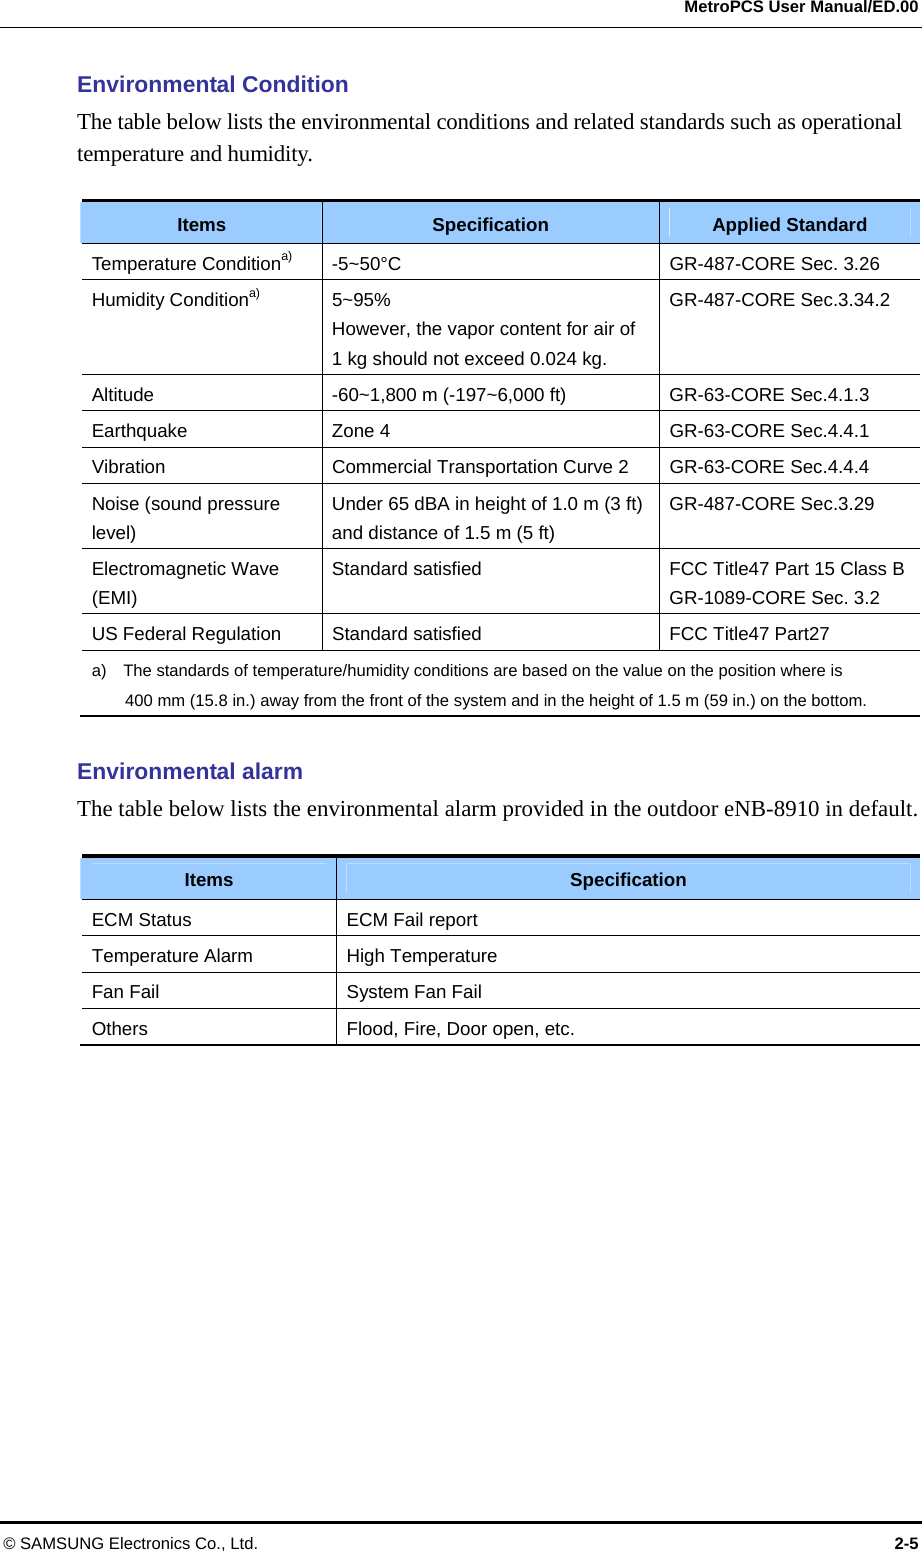  MetroPCS User Manual/ED.00 © SAMSUNG Electronics Co., Ltd.  2-5 Environmental Condition The table below lists the environmental conditions and related standards such as operational temperature and humidity.  Items  Specification  Applied Standard Temperature Conditiona)  -5~50°C  GR-487-CORE Sec. 3.26 Humidity Conditiona) 5~95% However, the vapor content for air of 1 kg should not exceed 0.024 kg. GR-487-CORE Sec.3.34.2 Altitude  -60~1,800 m (-197~6,000 ft)  GR-63-CORE Sec.4.1.3 Earthquake Zone 4  GR-63-CORE Sec.4.4.1 Vibration Commercial Transportation Curve 2  GR-63-CORE Sec.4.4.4 Noise (sound pressure level) Under 65 dBA in height of 1.0 m (3 ft) and distance of 1.5 m (5 ft) GR-487-CORE Sec.3.29 Electromagnetic Wave (EMI) Standard satisfied  FCC Title47 Part 15 Class BGR-1089-CORE Sec. 3.2 US Federal Regulation  Standard satisfied  FCC Title47 Part27 a)    The standards of temperature/humidity conditions are based on the value on the position where is 400 mm (15.8 in.) away from the front of the system and in the height of 1.5 m (59 in.) on the bottom.  Environmental alarm The table below lists the environmental alarm provided in the outdoor eNB-8910 in default.  Items  Specification ECM Status  ECM Fail report Temperature Alarm  High Temperature Fan Fail  System Fan Fail Others  Flood, Fire, Door open, etc.  